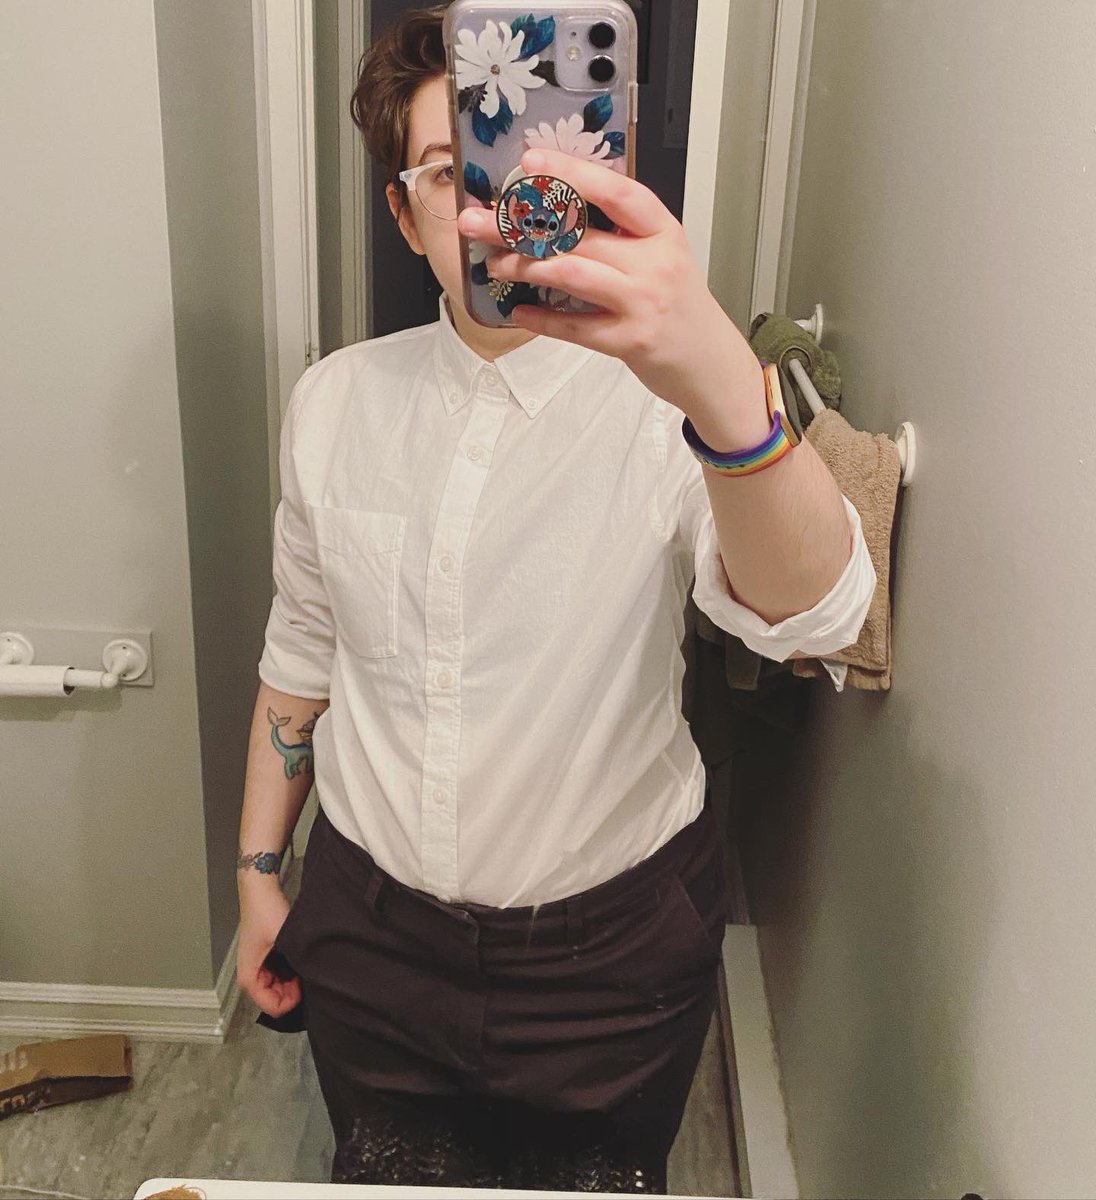 So yeah I’m getting the married on Saturday! Sporting this with suspenders obviously 👌💕 #queerwedding #queer #nonbinary 🏳️‍⚧️🏳️‍🌈